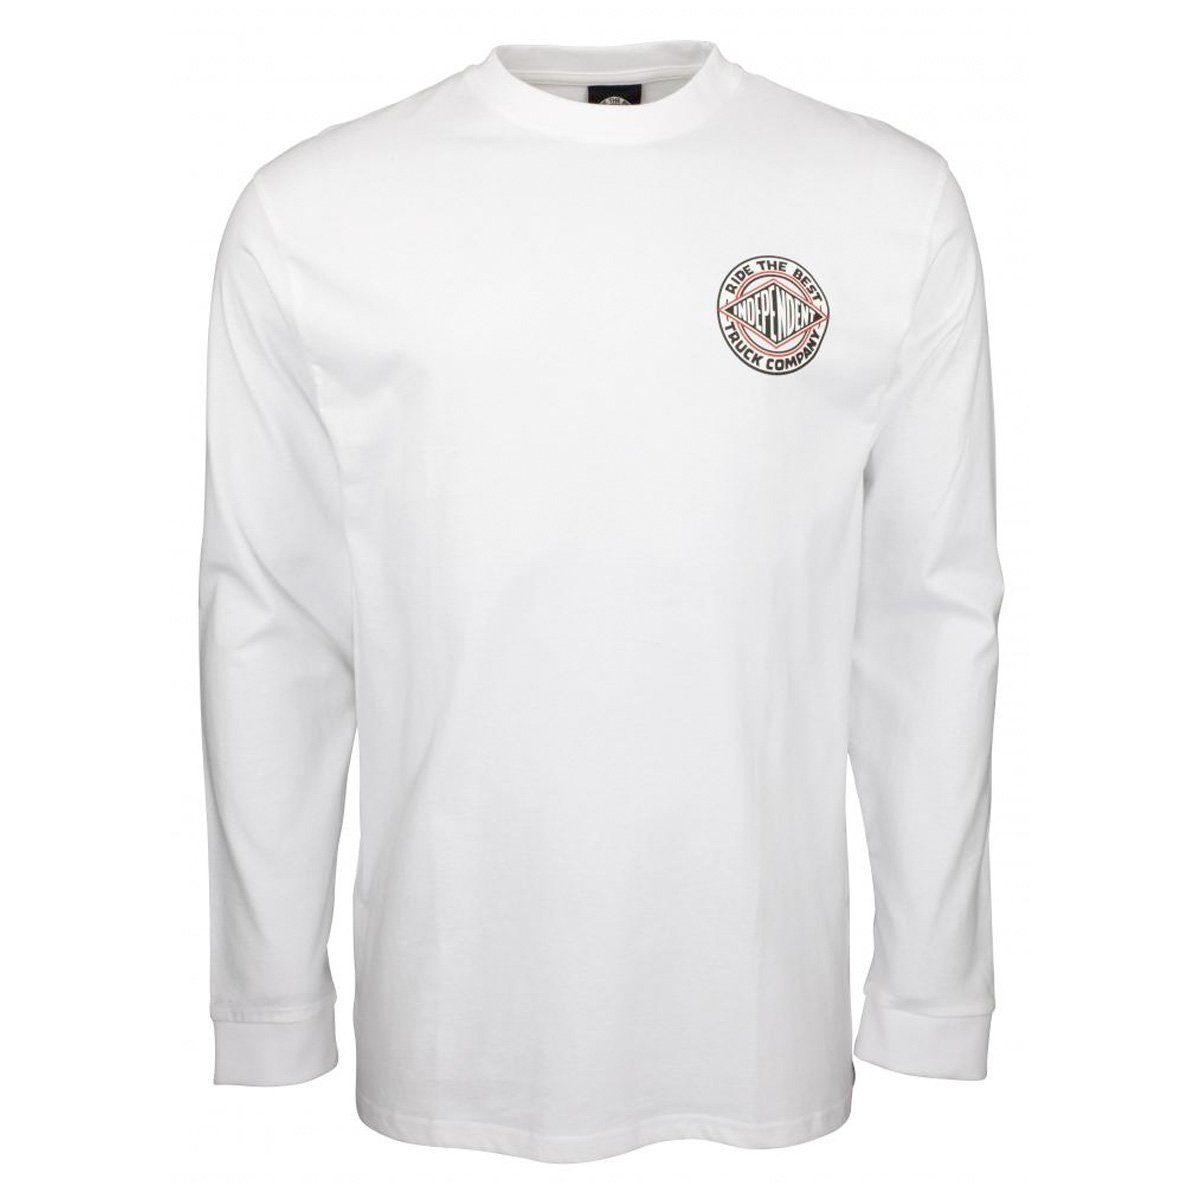 Grind Company Built Truck to Independent (white) Summit Longsleeve